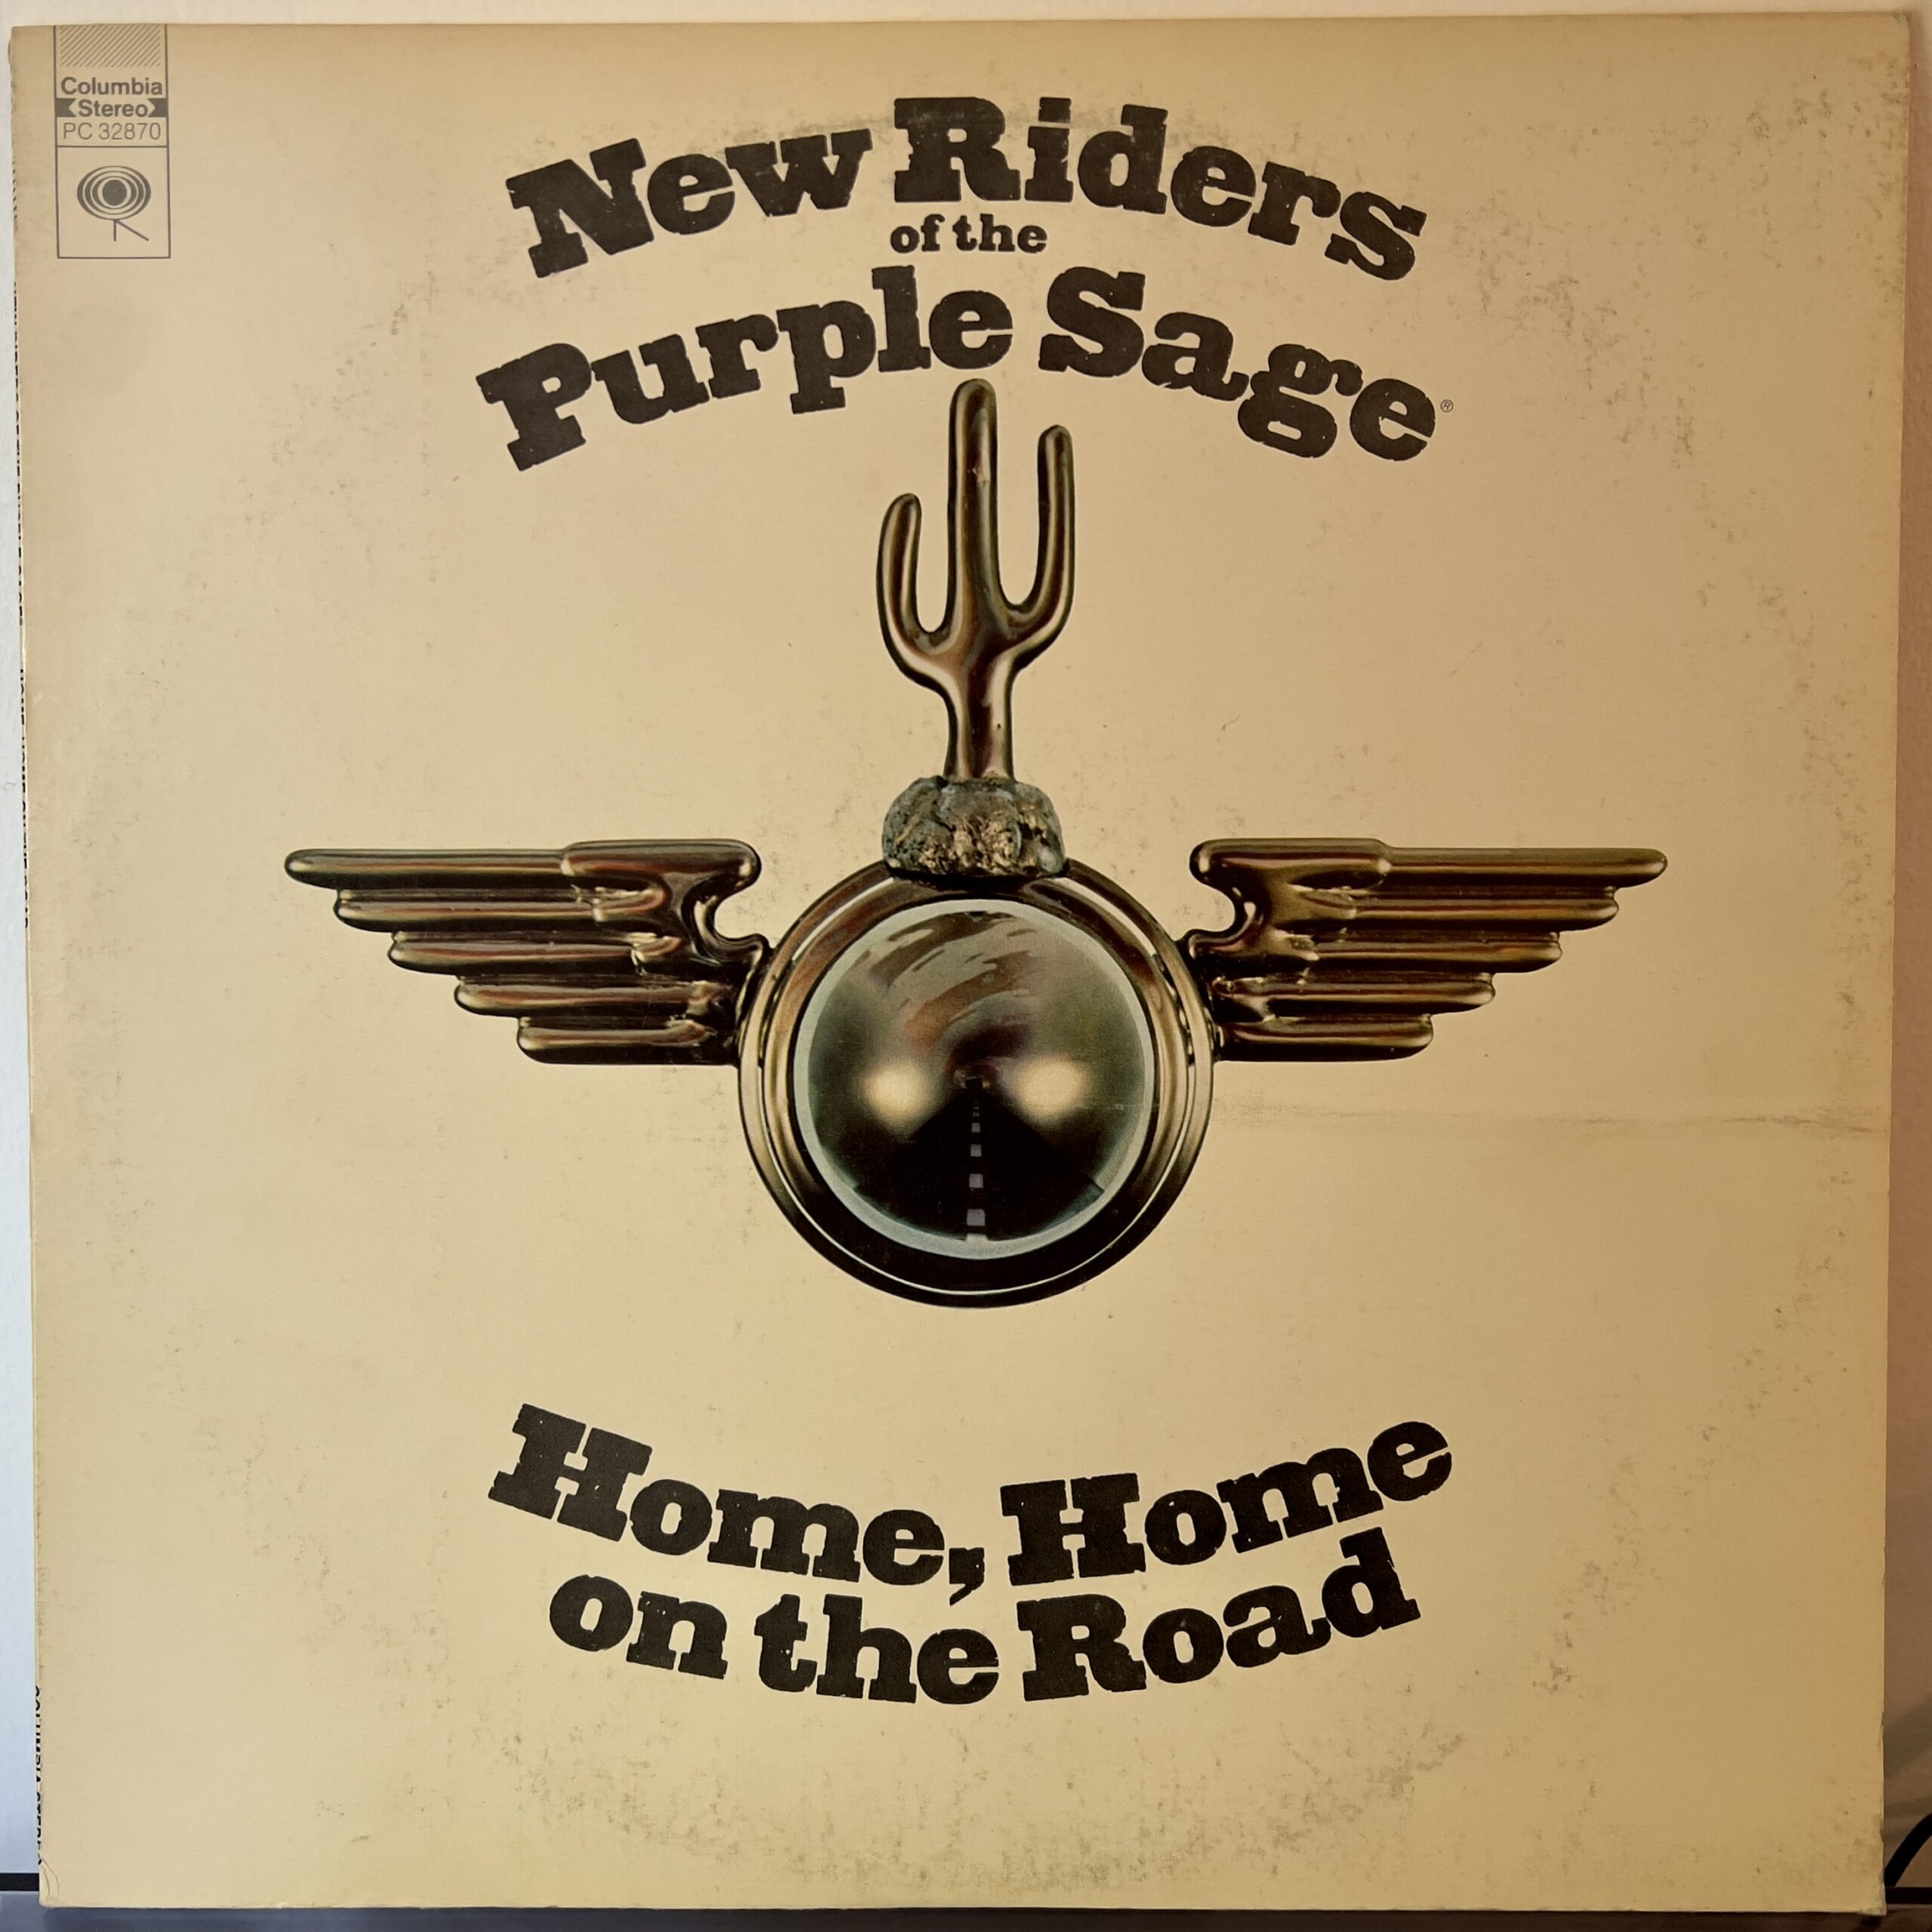 Home, Home on the Road by New Riders of the Purple Sage